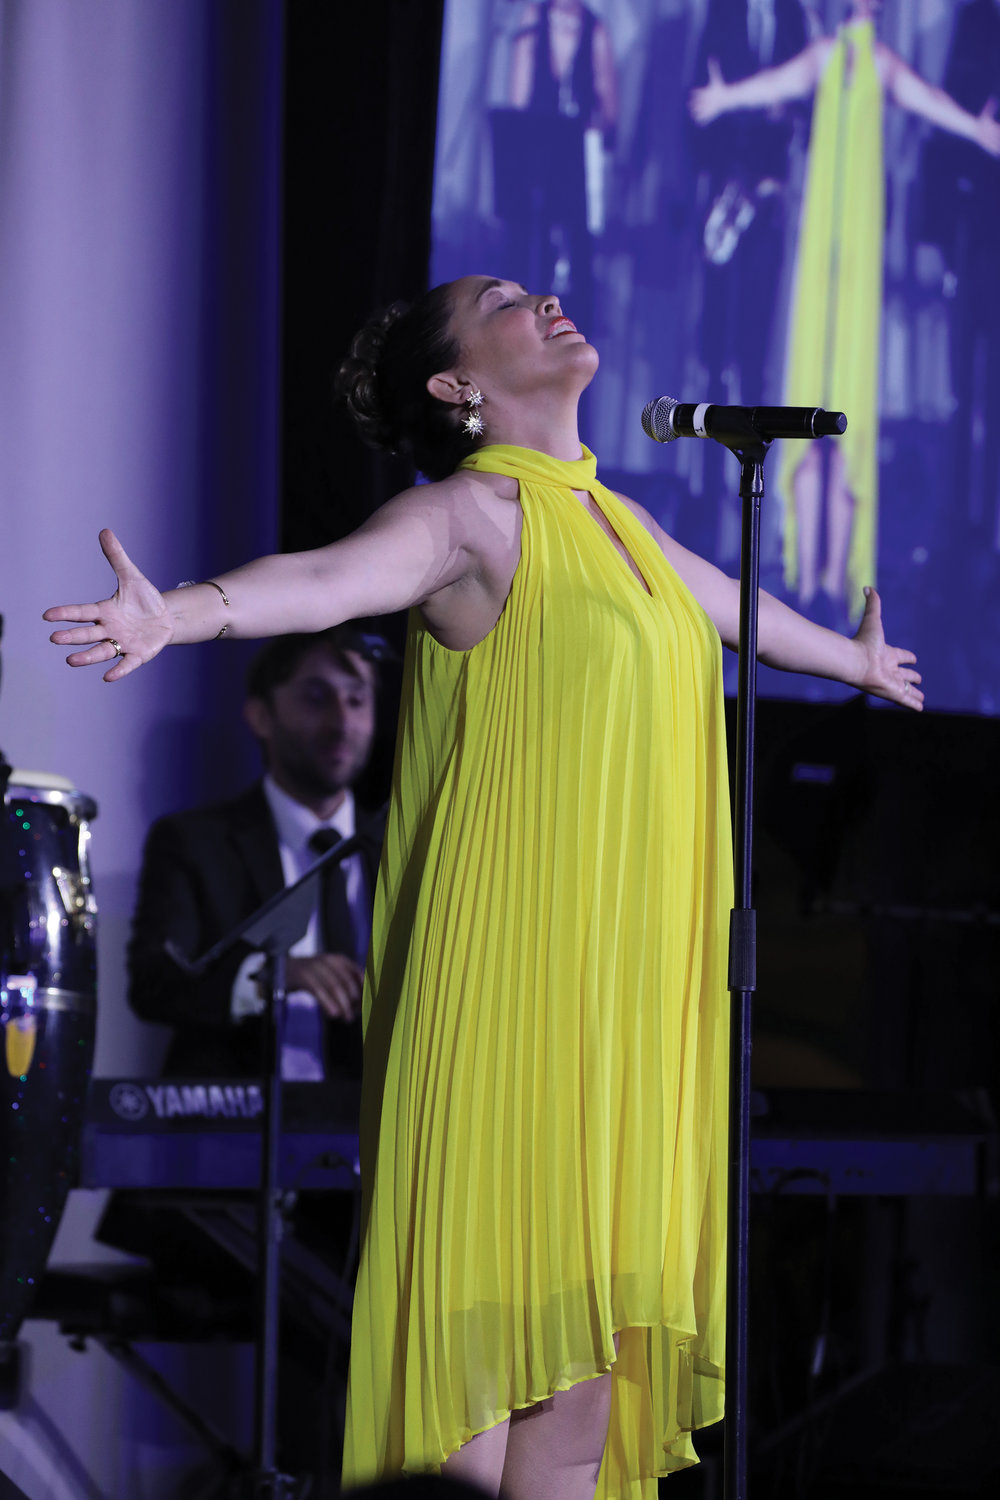 Award-winning Broadway performer Andréa Burns sang “Paciencia y Fe” from “In the Heights” and “A Place for Us” from “West Side Story.”